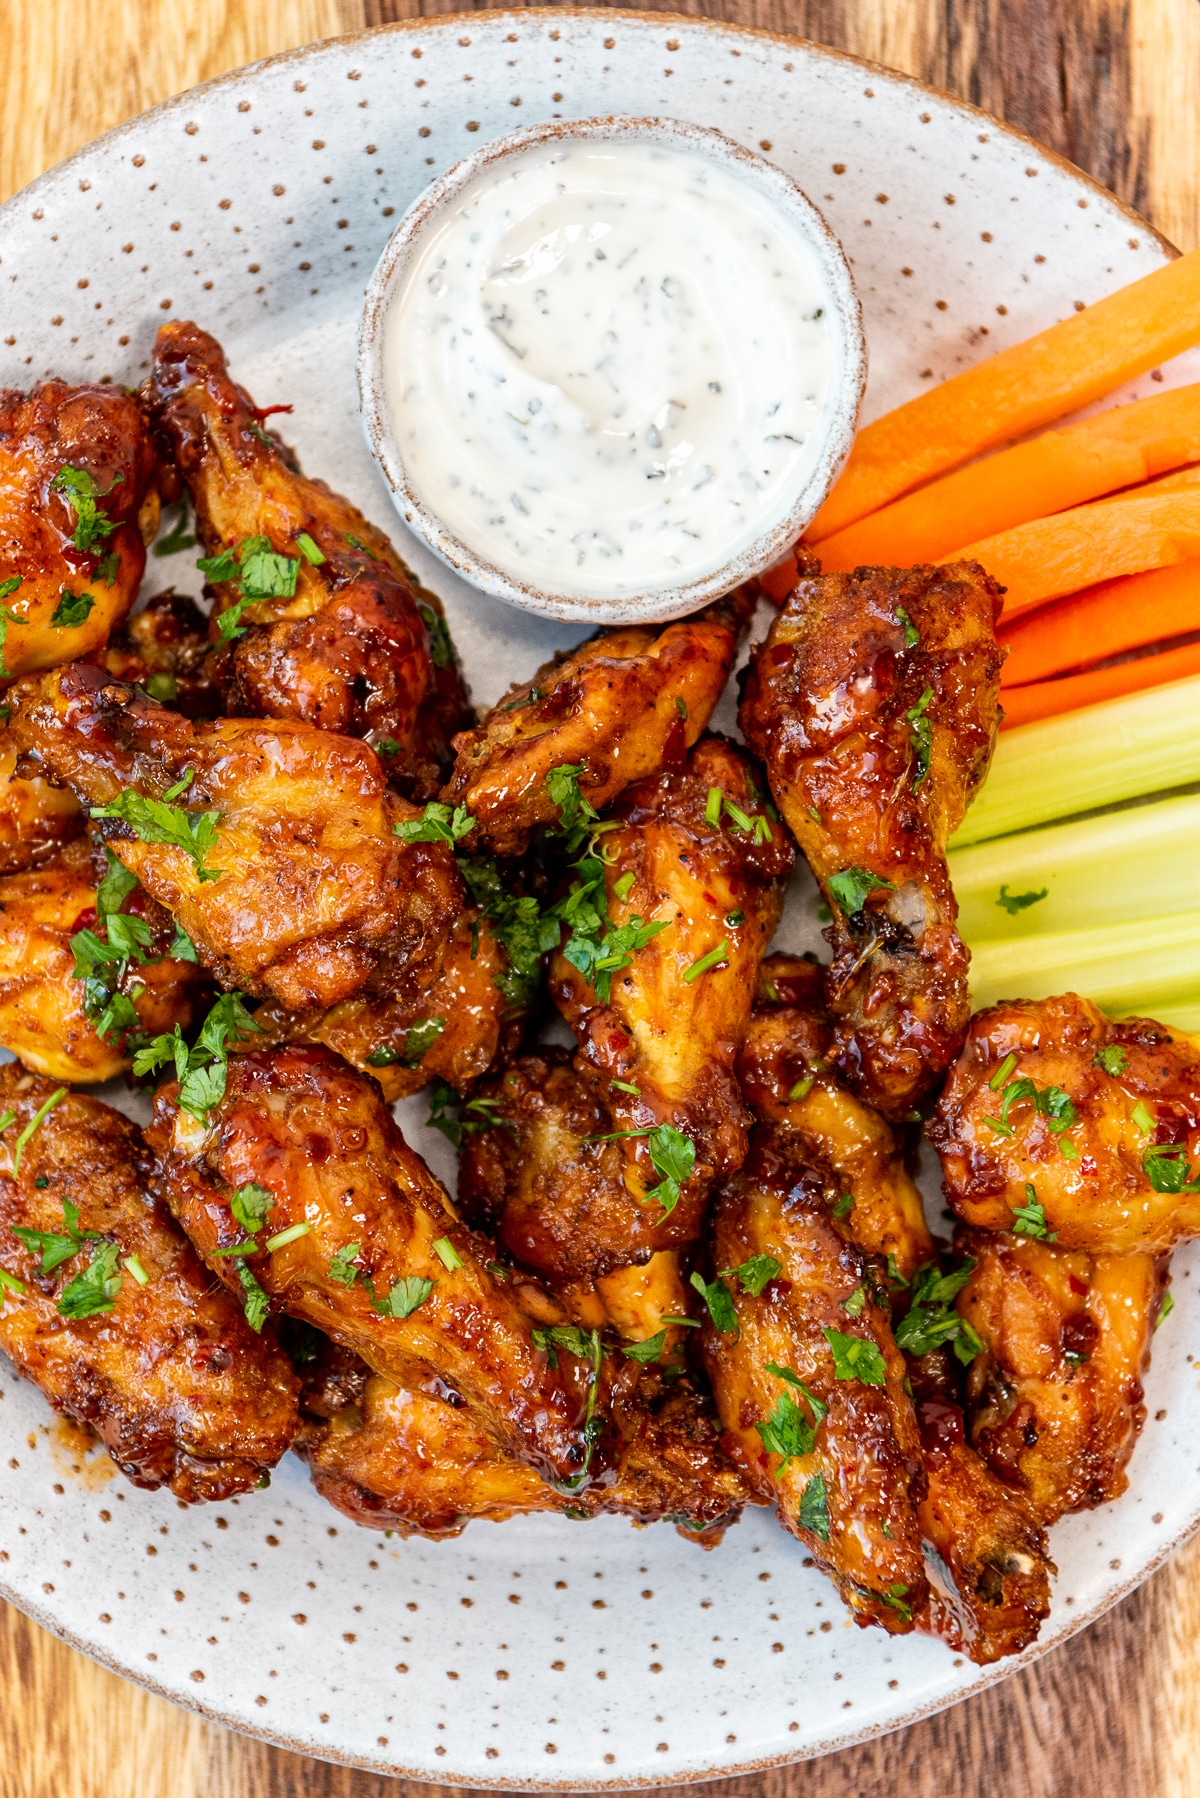 Baked buffalo wings served on a white plate with carrot and celery sticks and a yogurt dip sauce on the side.